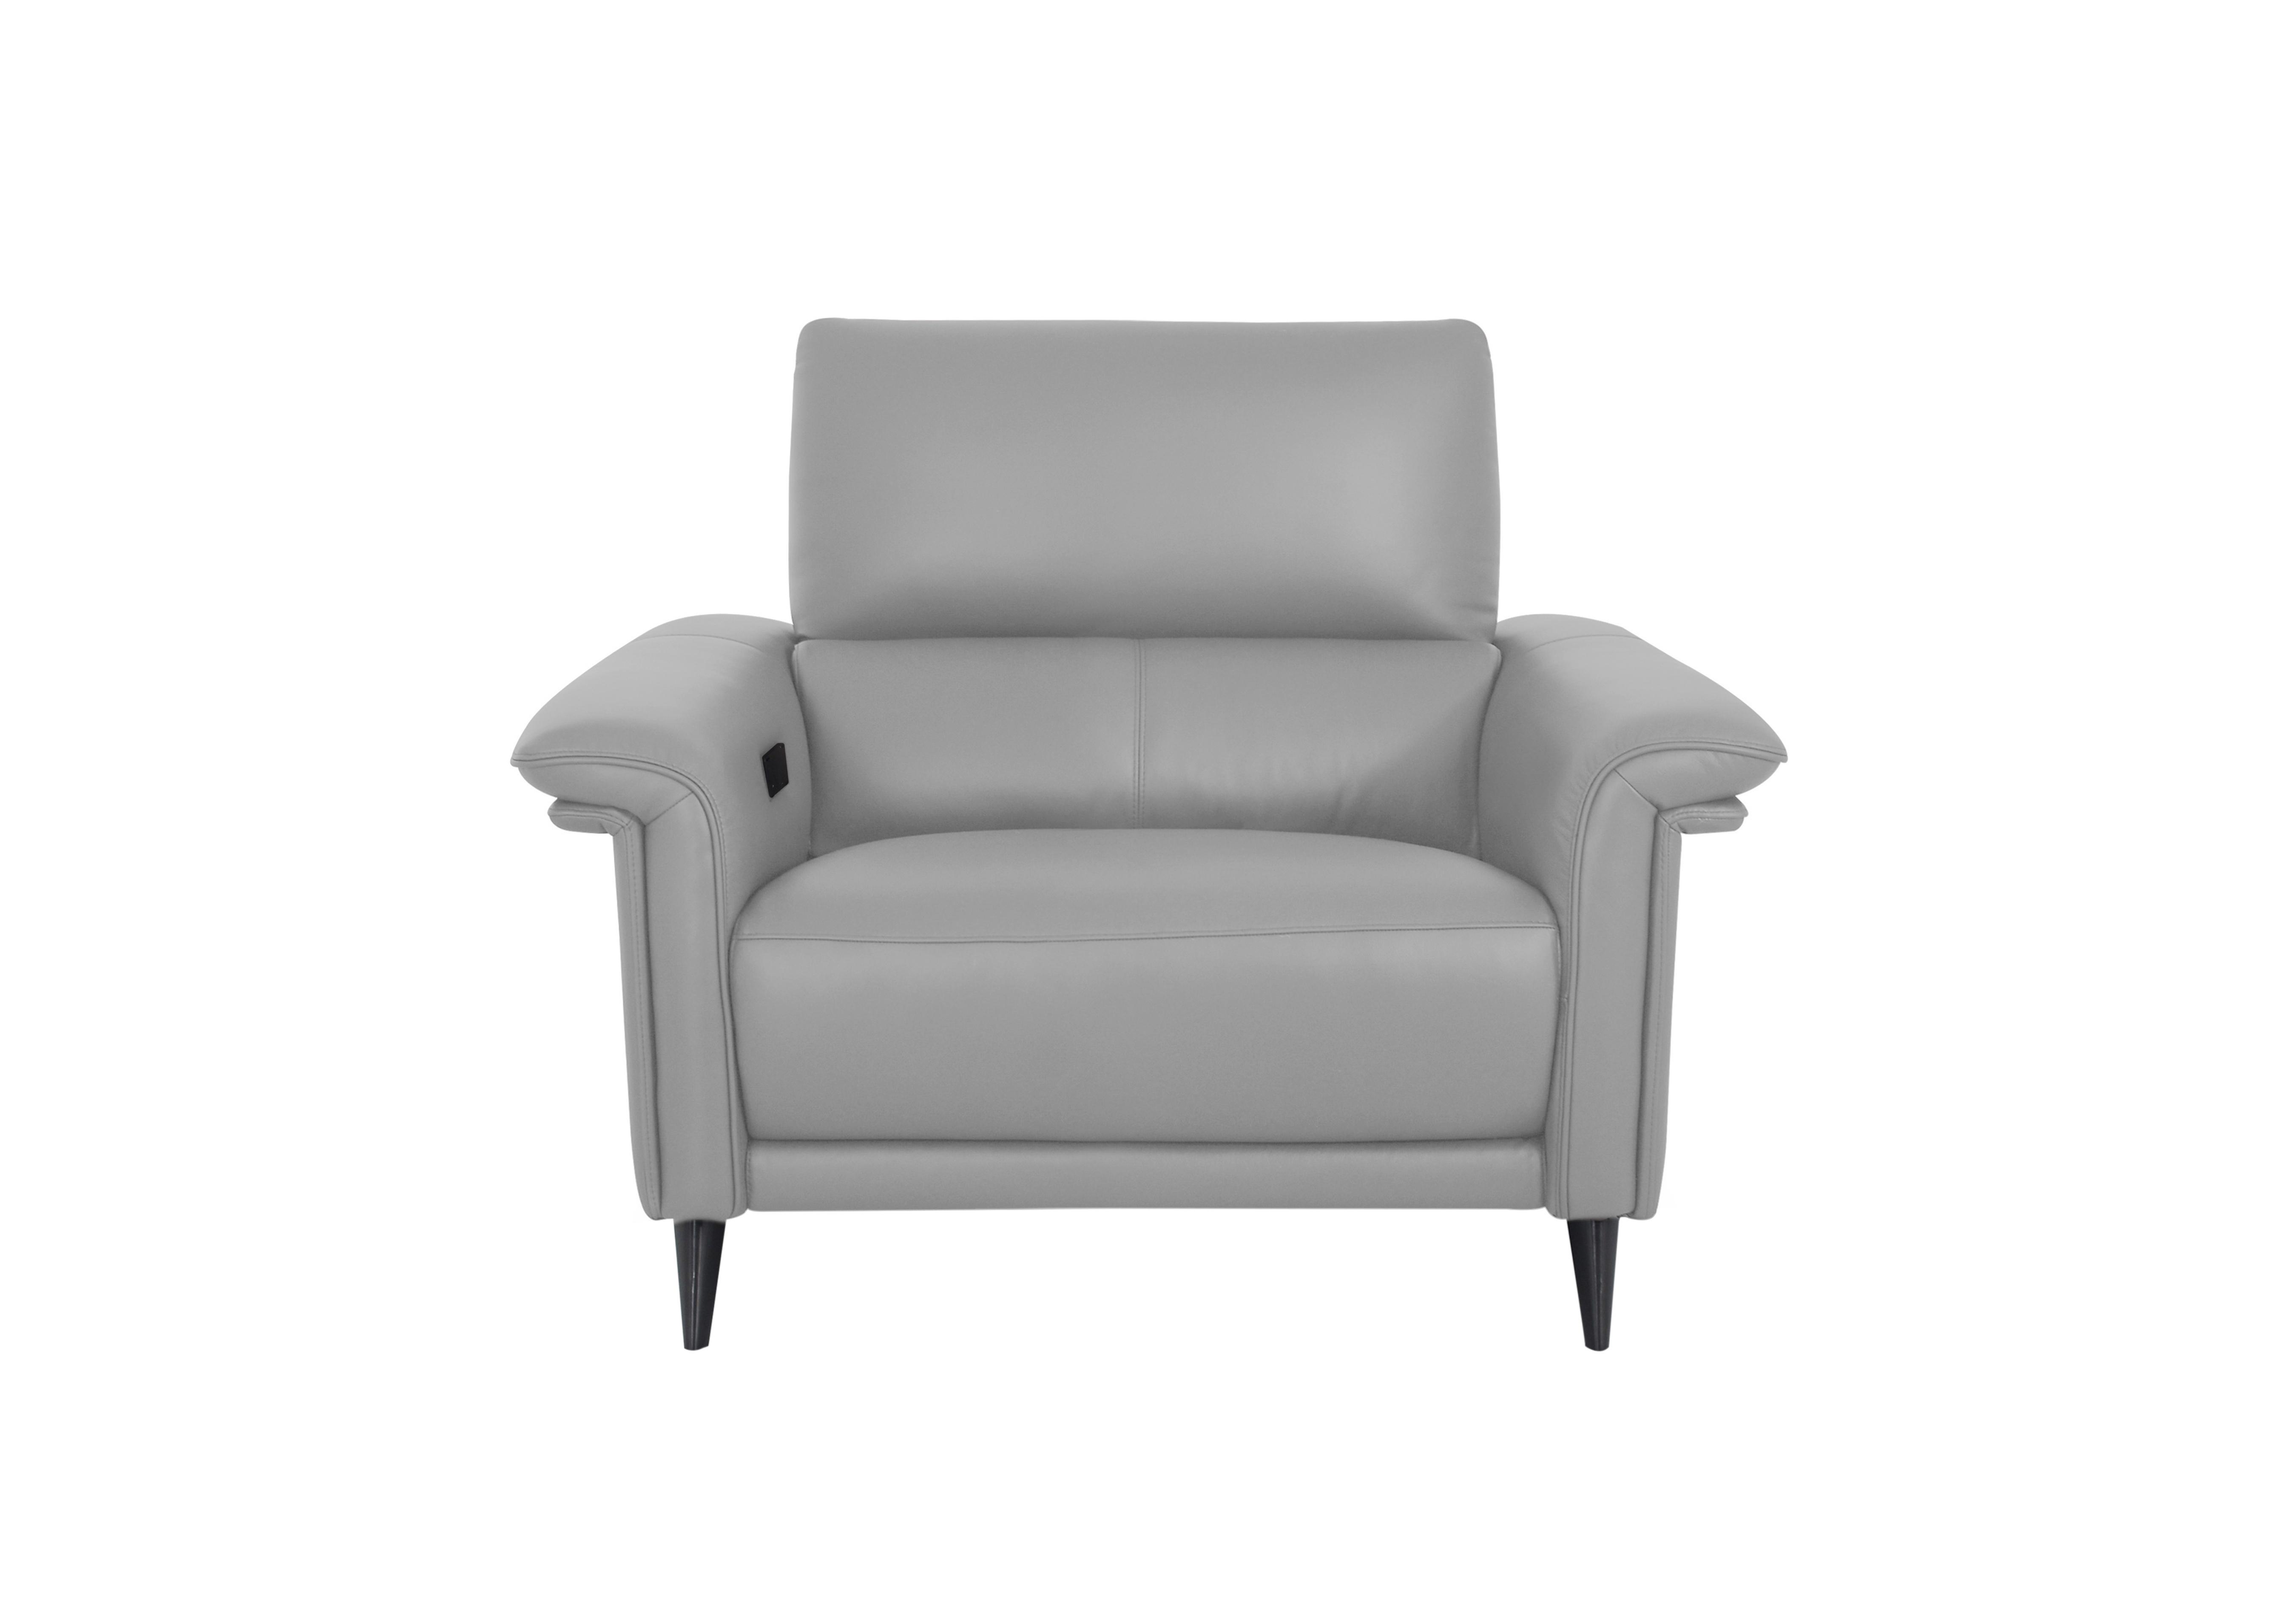 Huxley Leather Chair in Nn-516e Light Grey on Furniture Village